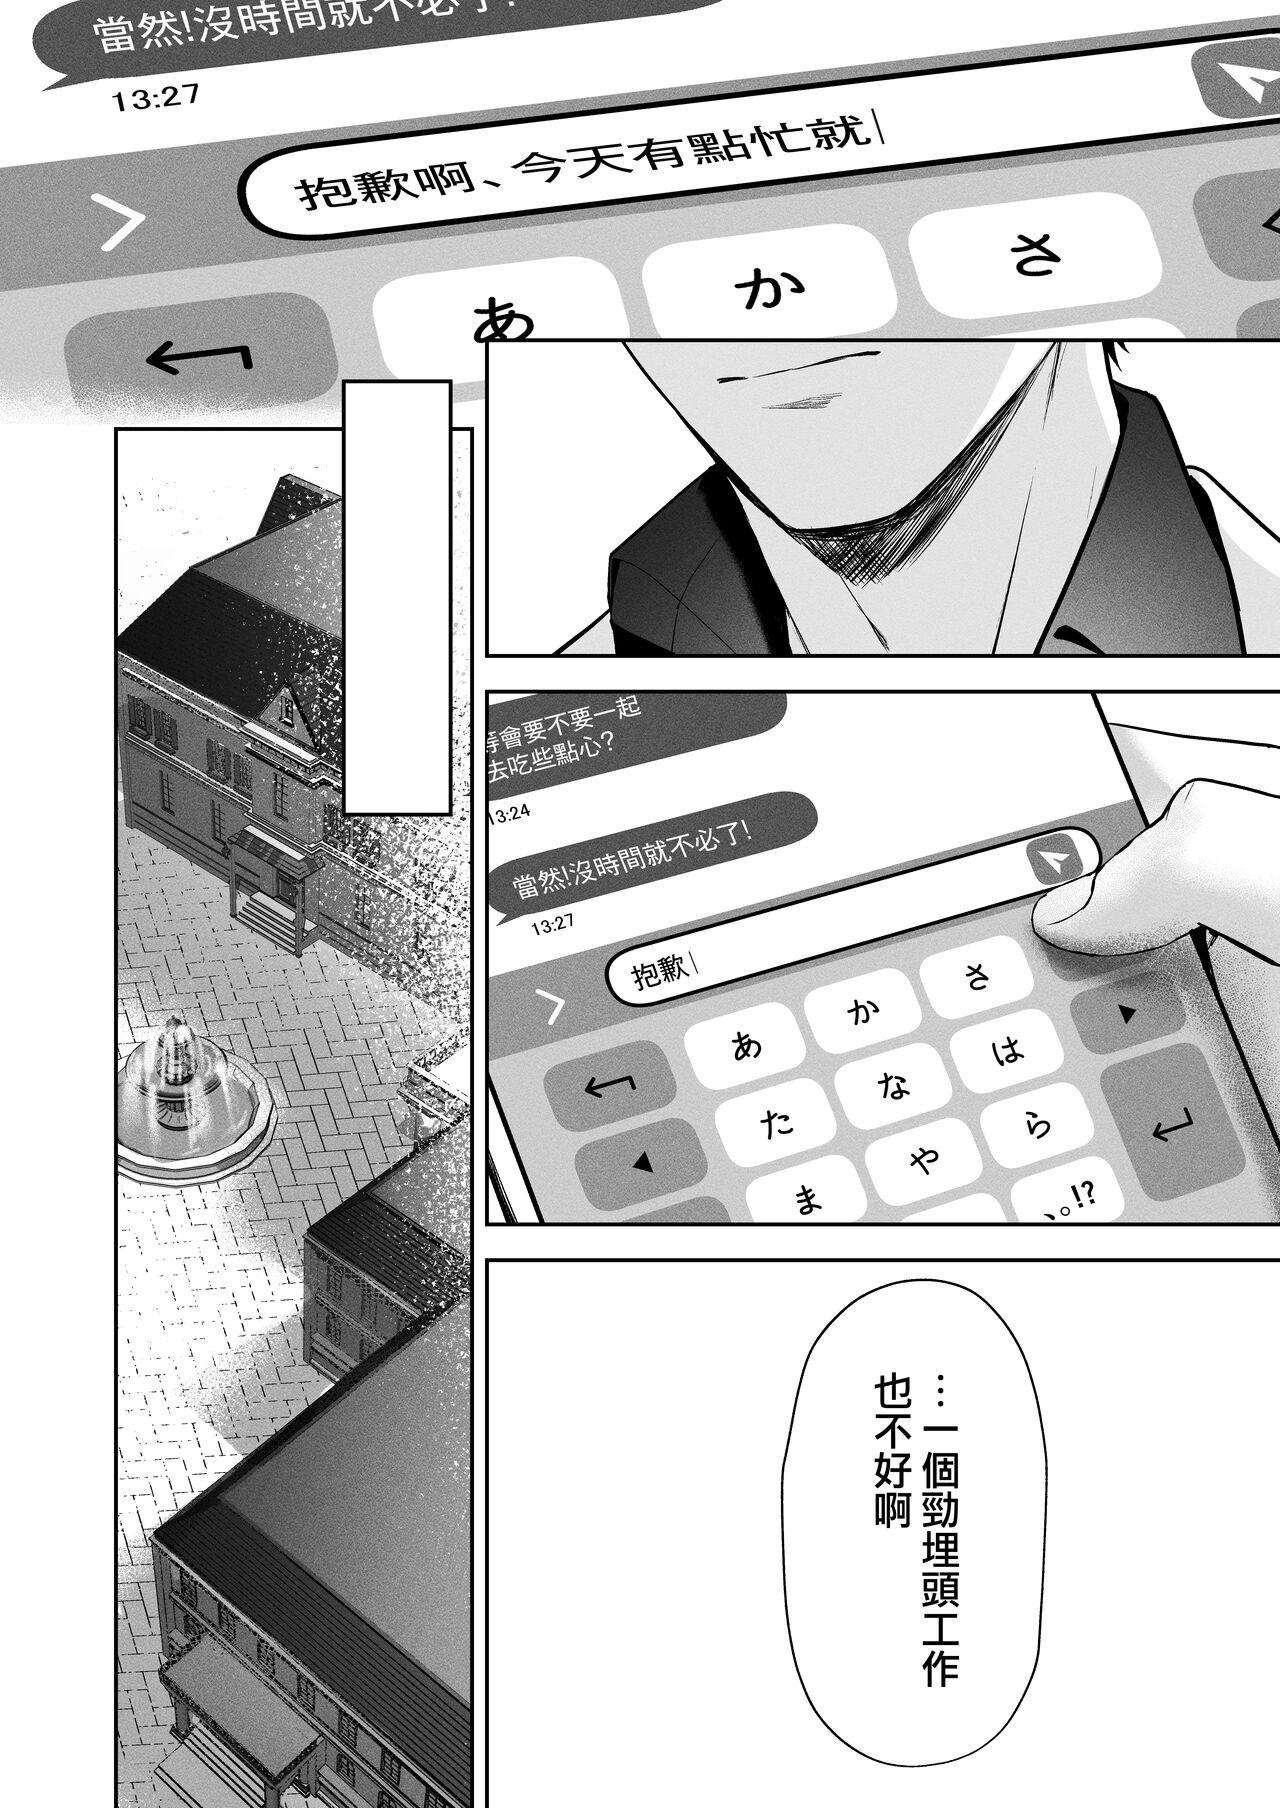 Glasses Mikazuki no Pierce Hole - Pierce Hole of The Cresent Moon - Blue archive Stroking - Page 6